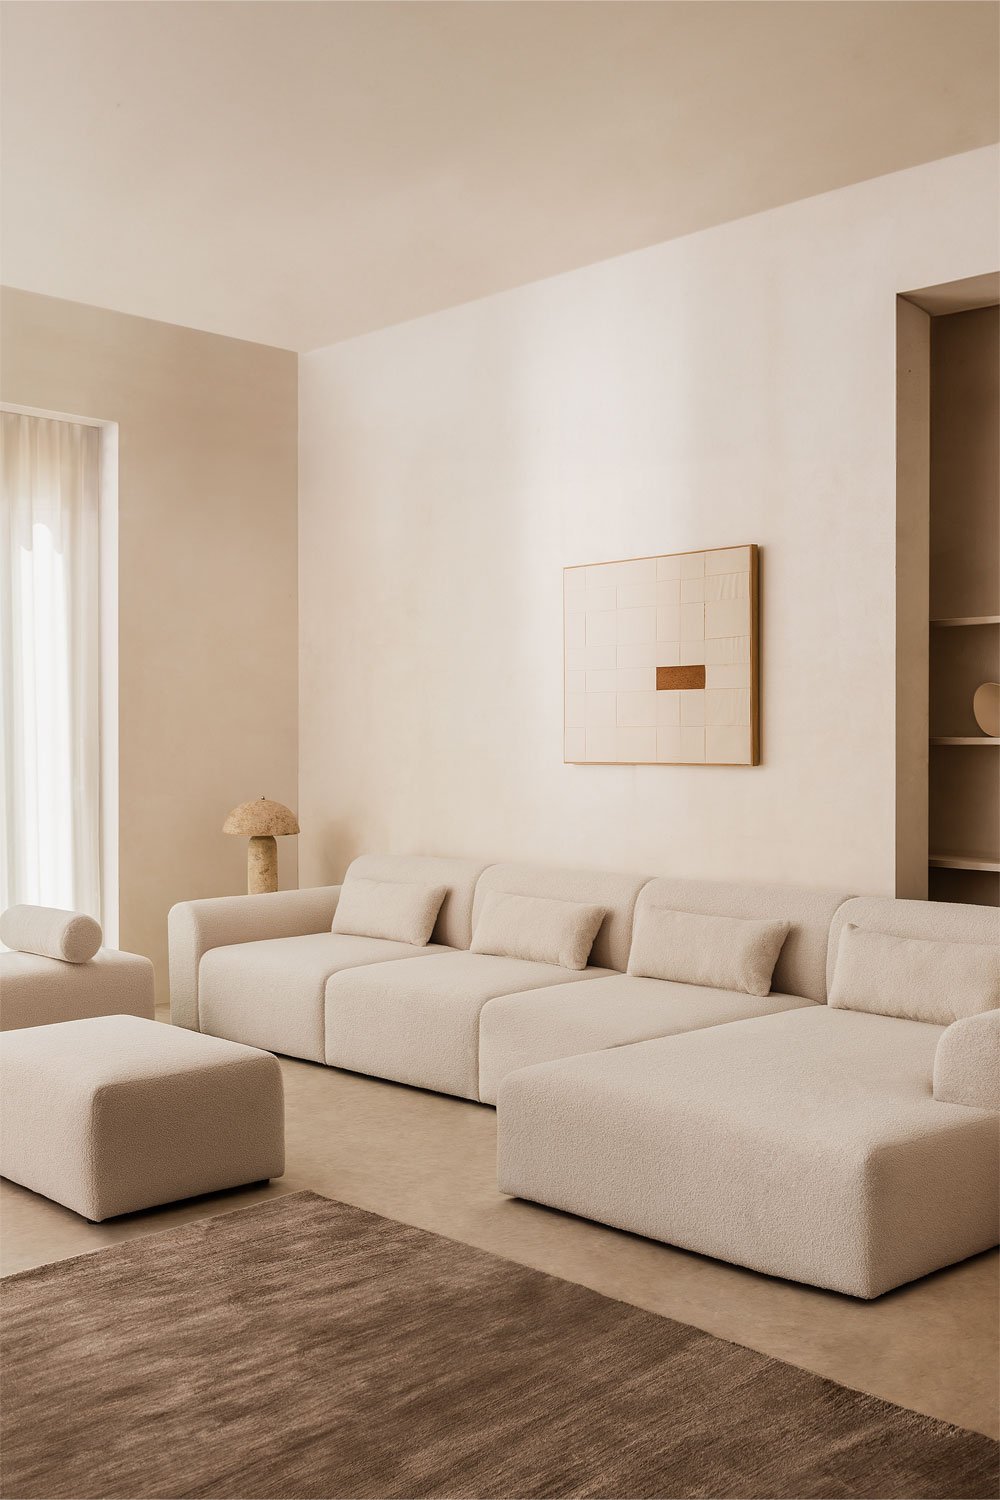 4-Piece Modular Chaise Longue Sofa with Left Corner and Pouffes in Borreguito Borjan, gallery image 1